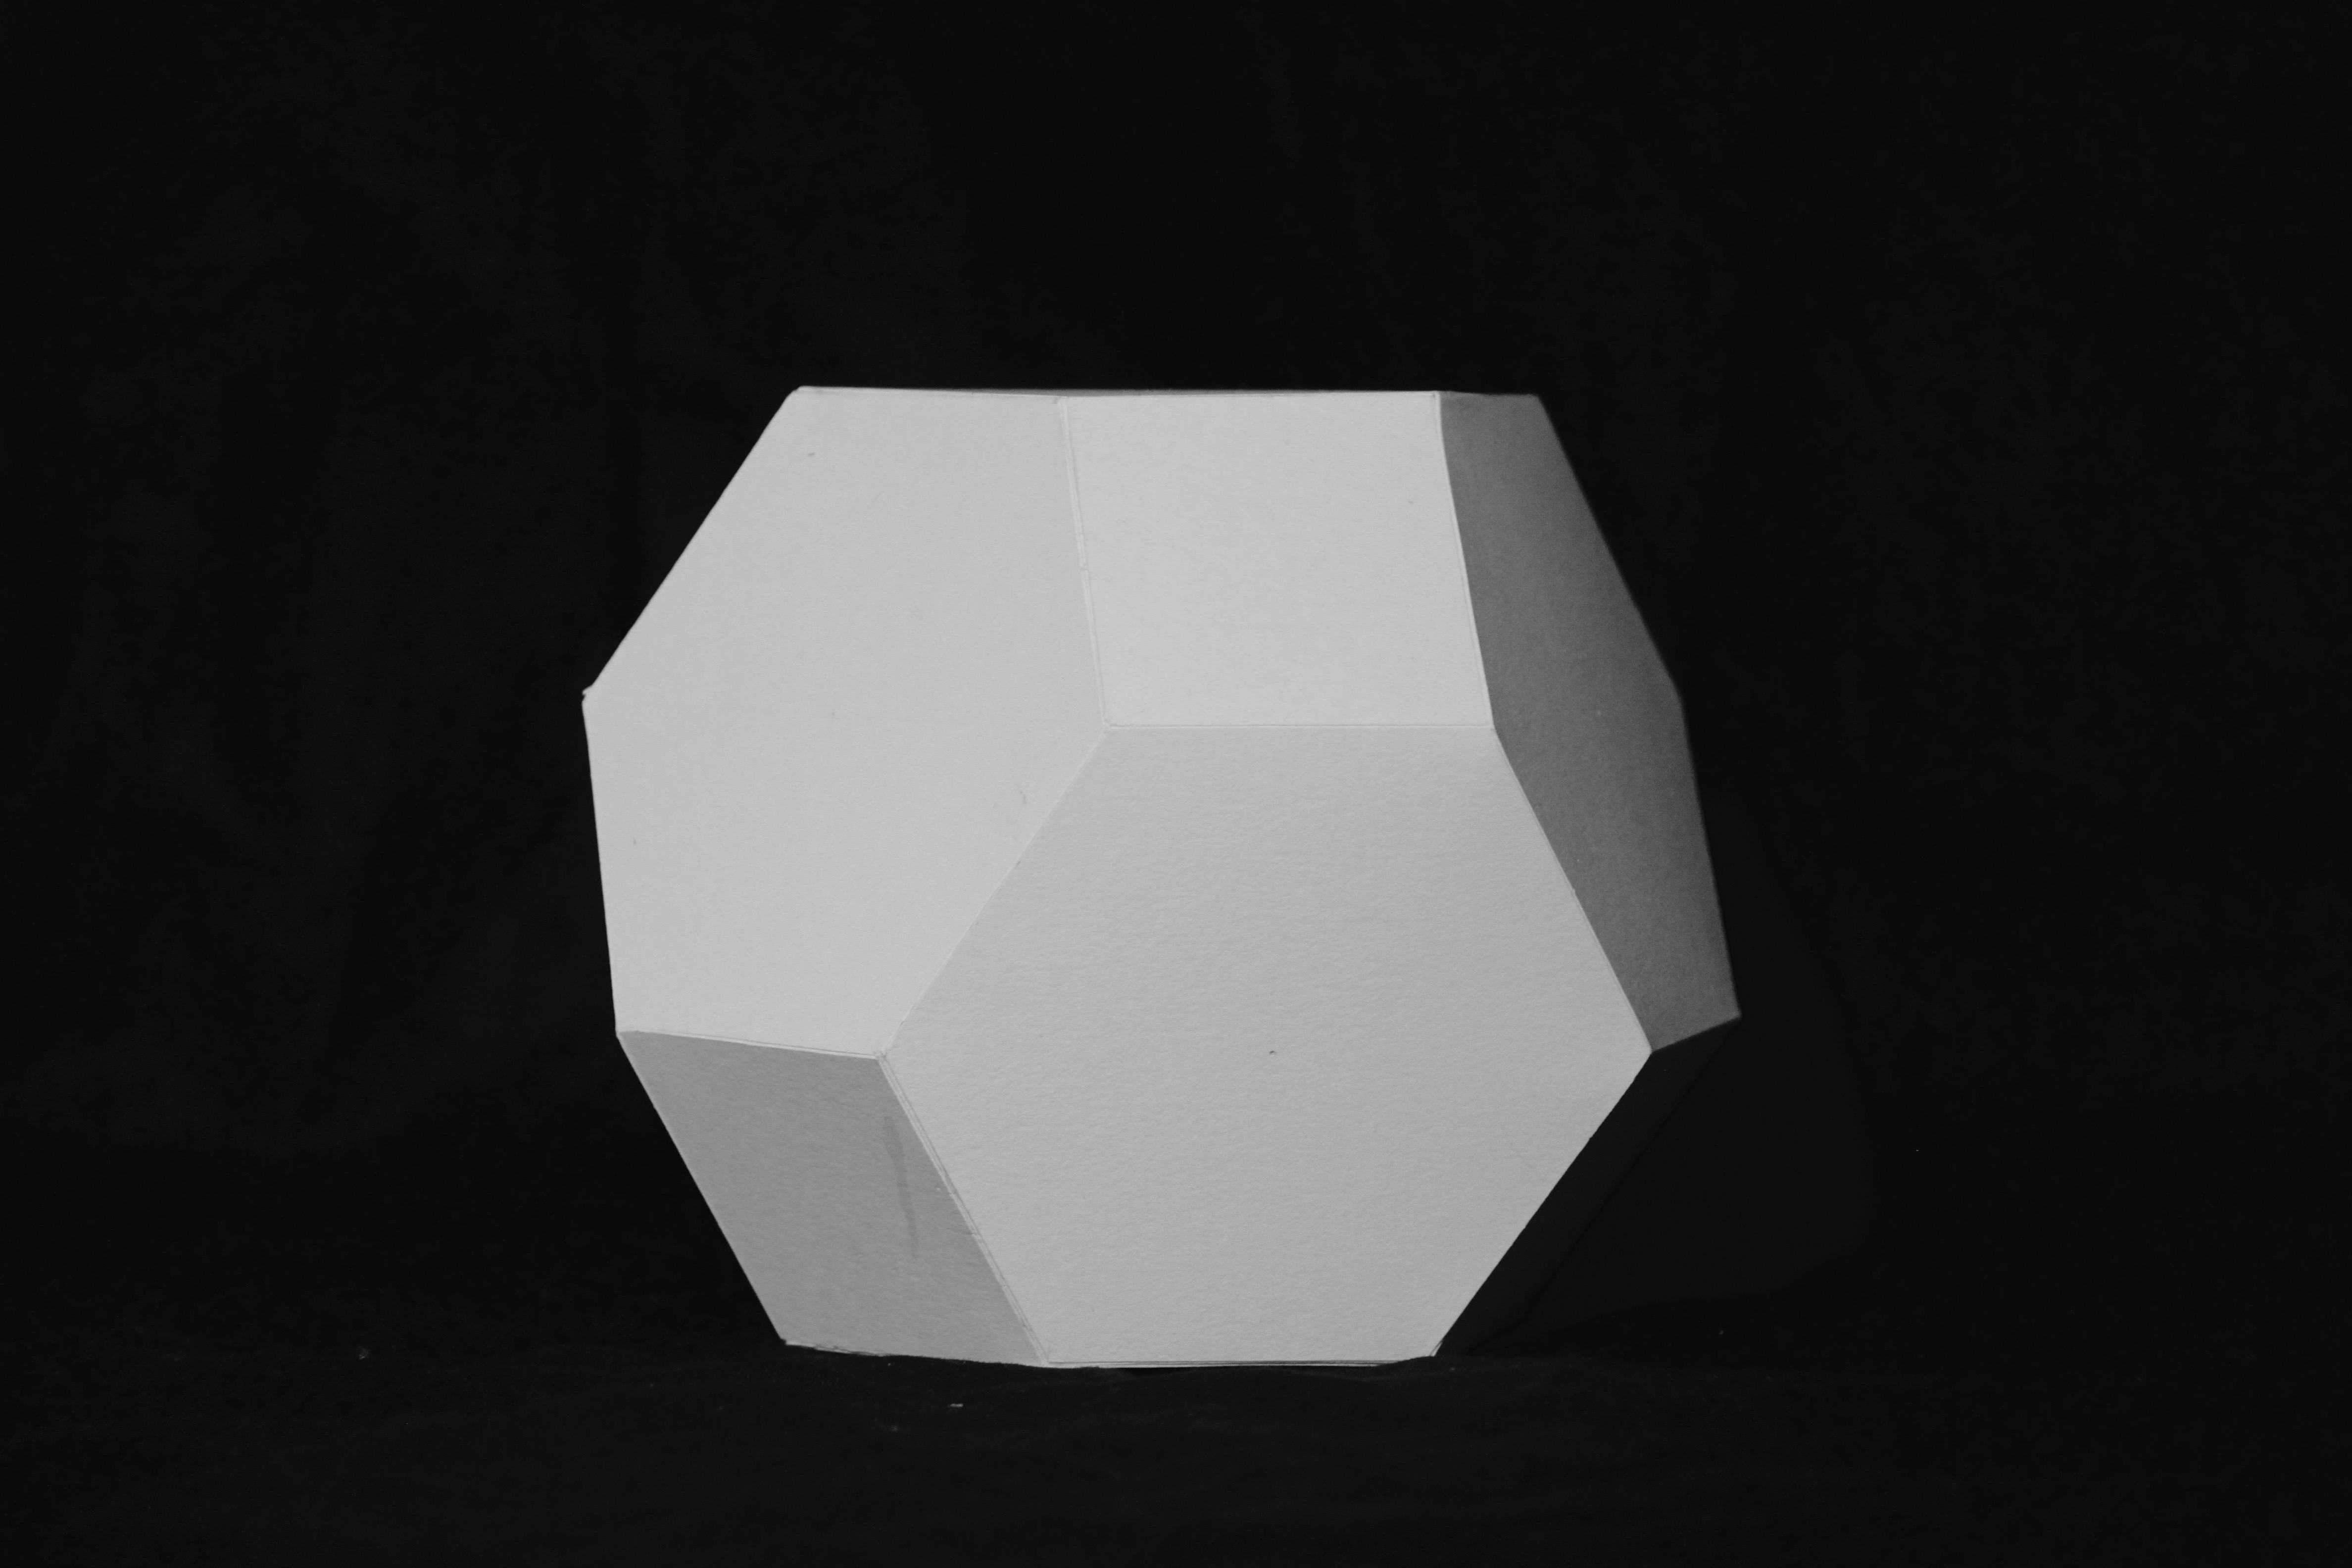 POLYHEDRON-Closed Cell(Eric Cheng)